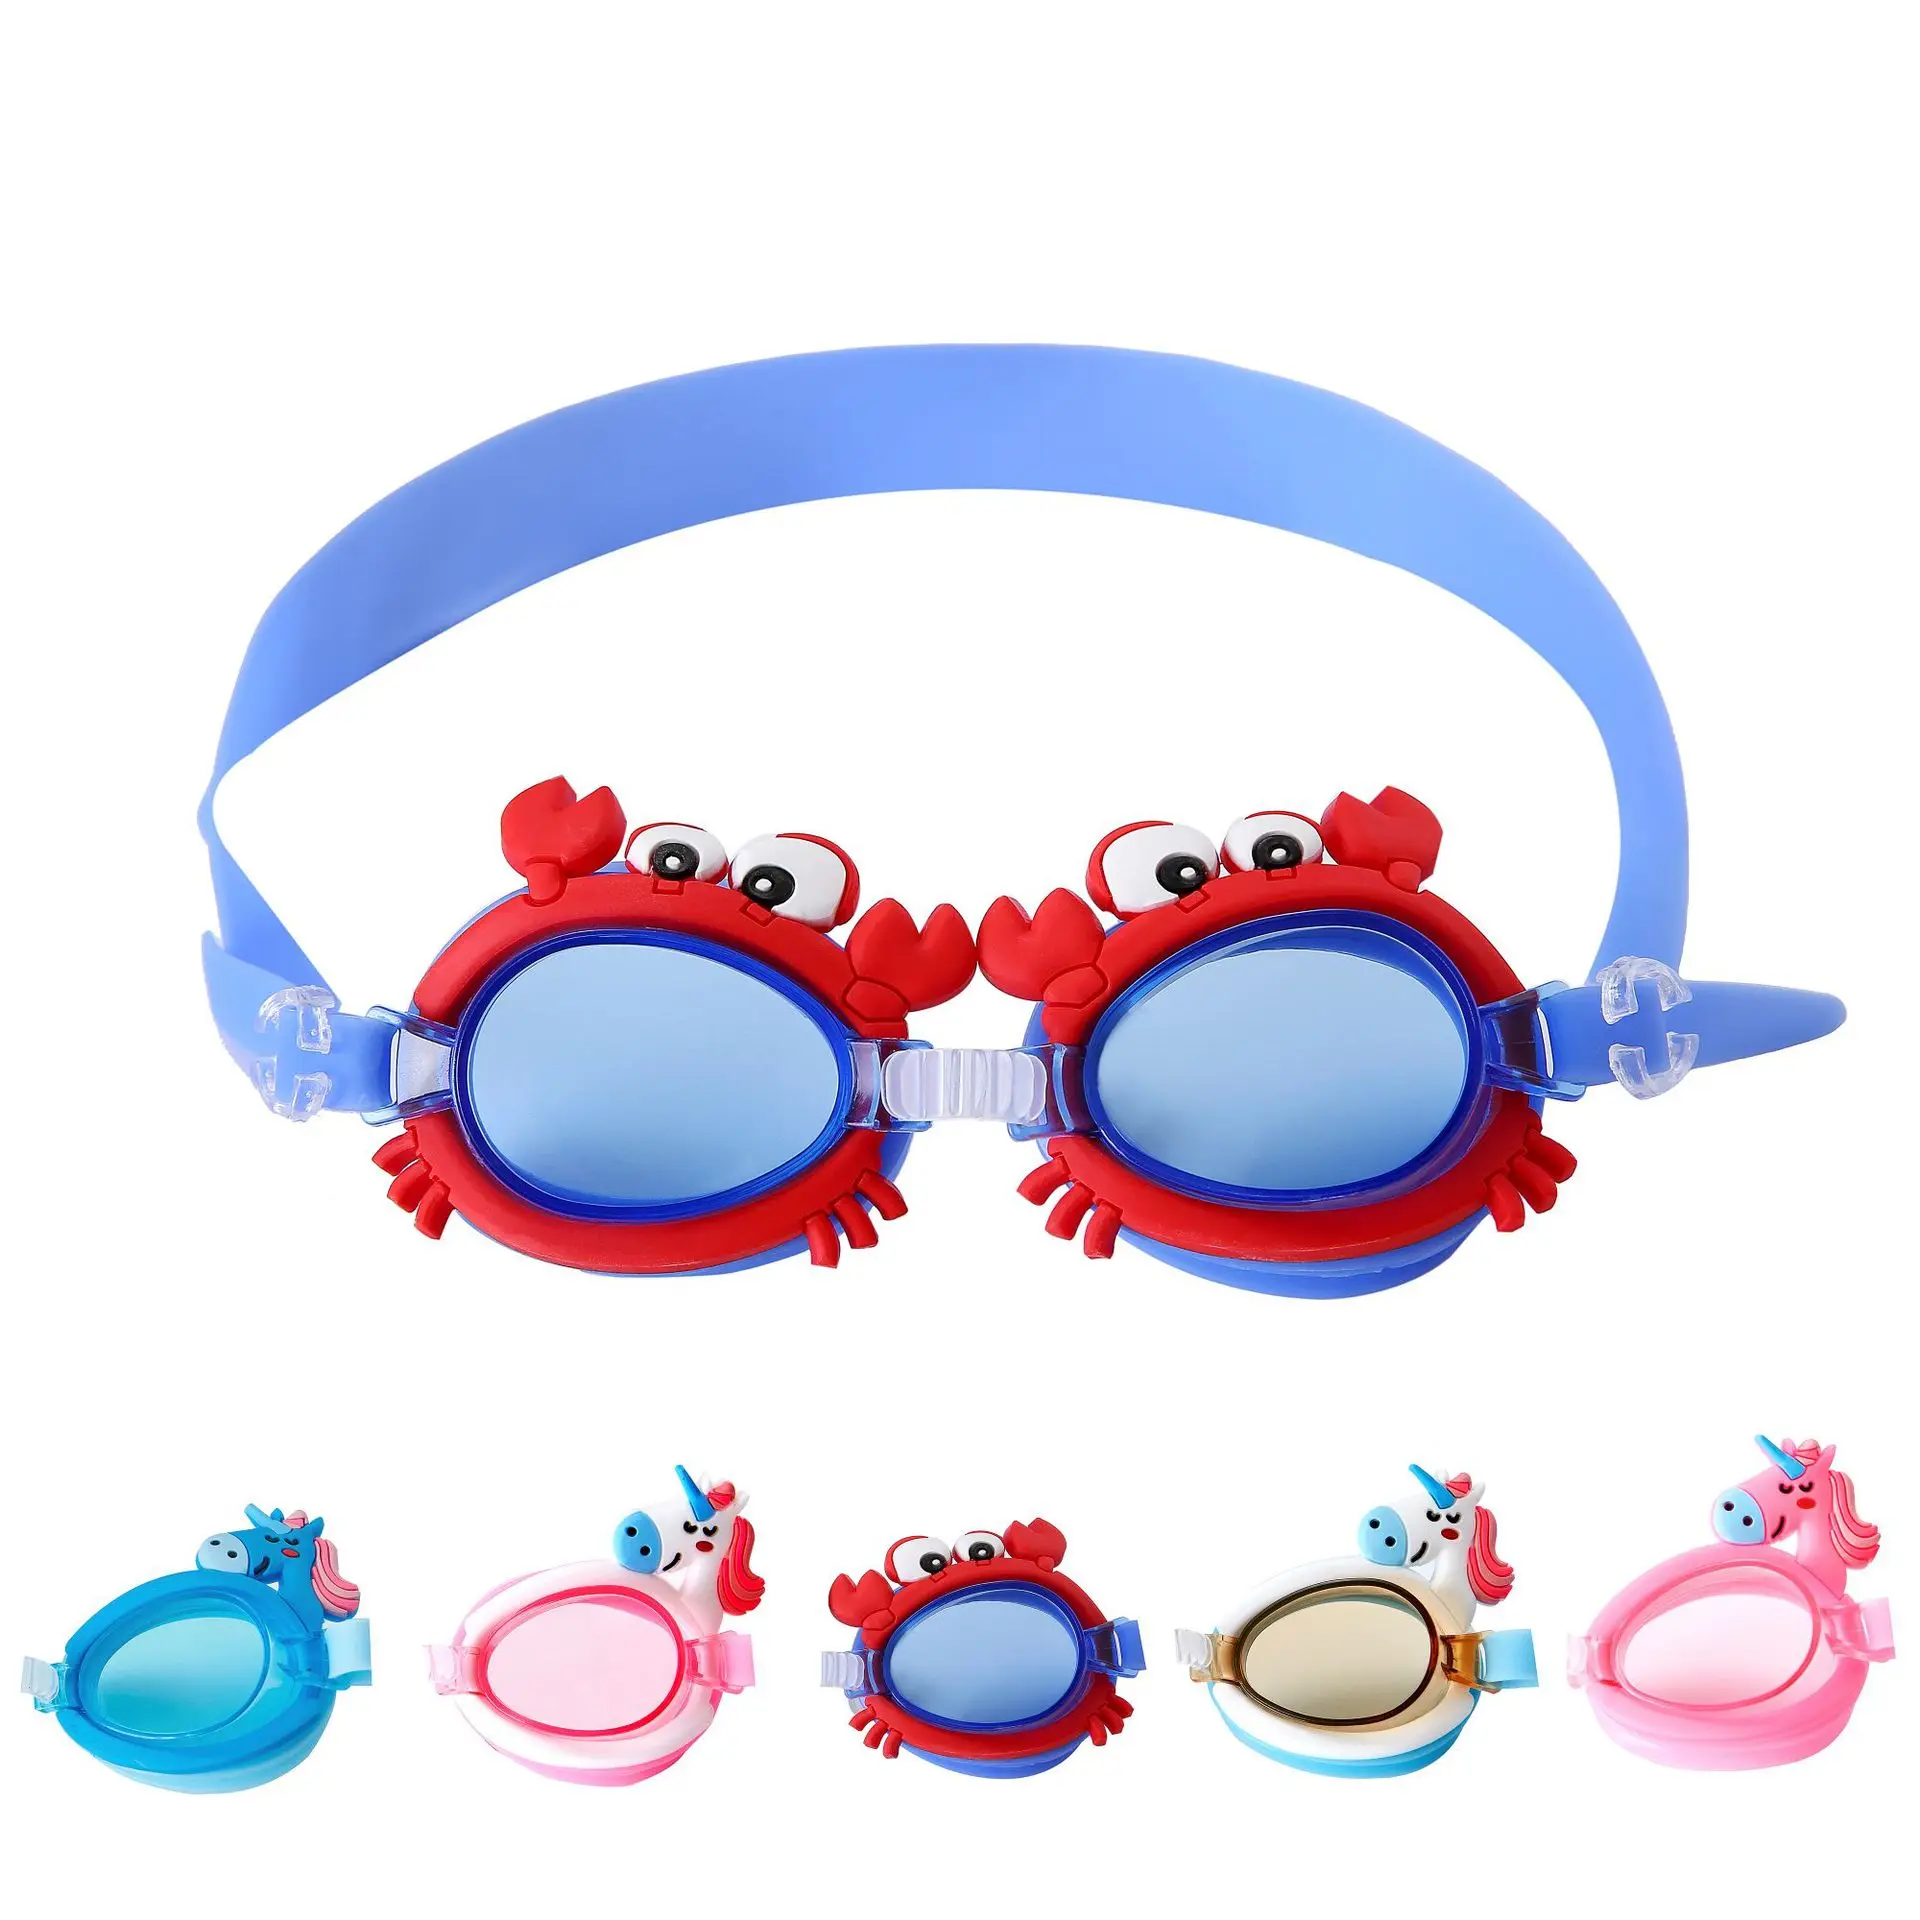 Best Children Swimming Goggles Cute Cartoon Fog-proof Goggles for Children The Mirror Band Is Adjustable Accept Wholesale